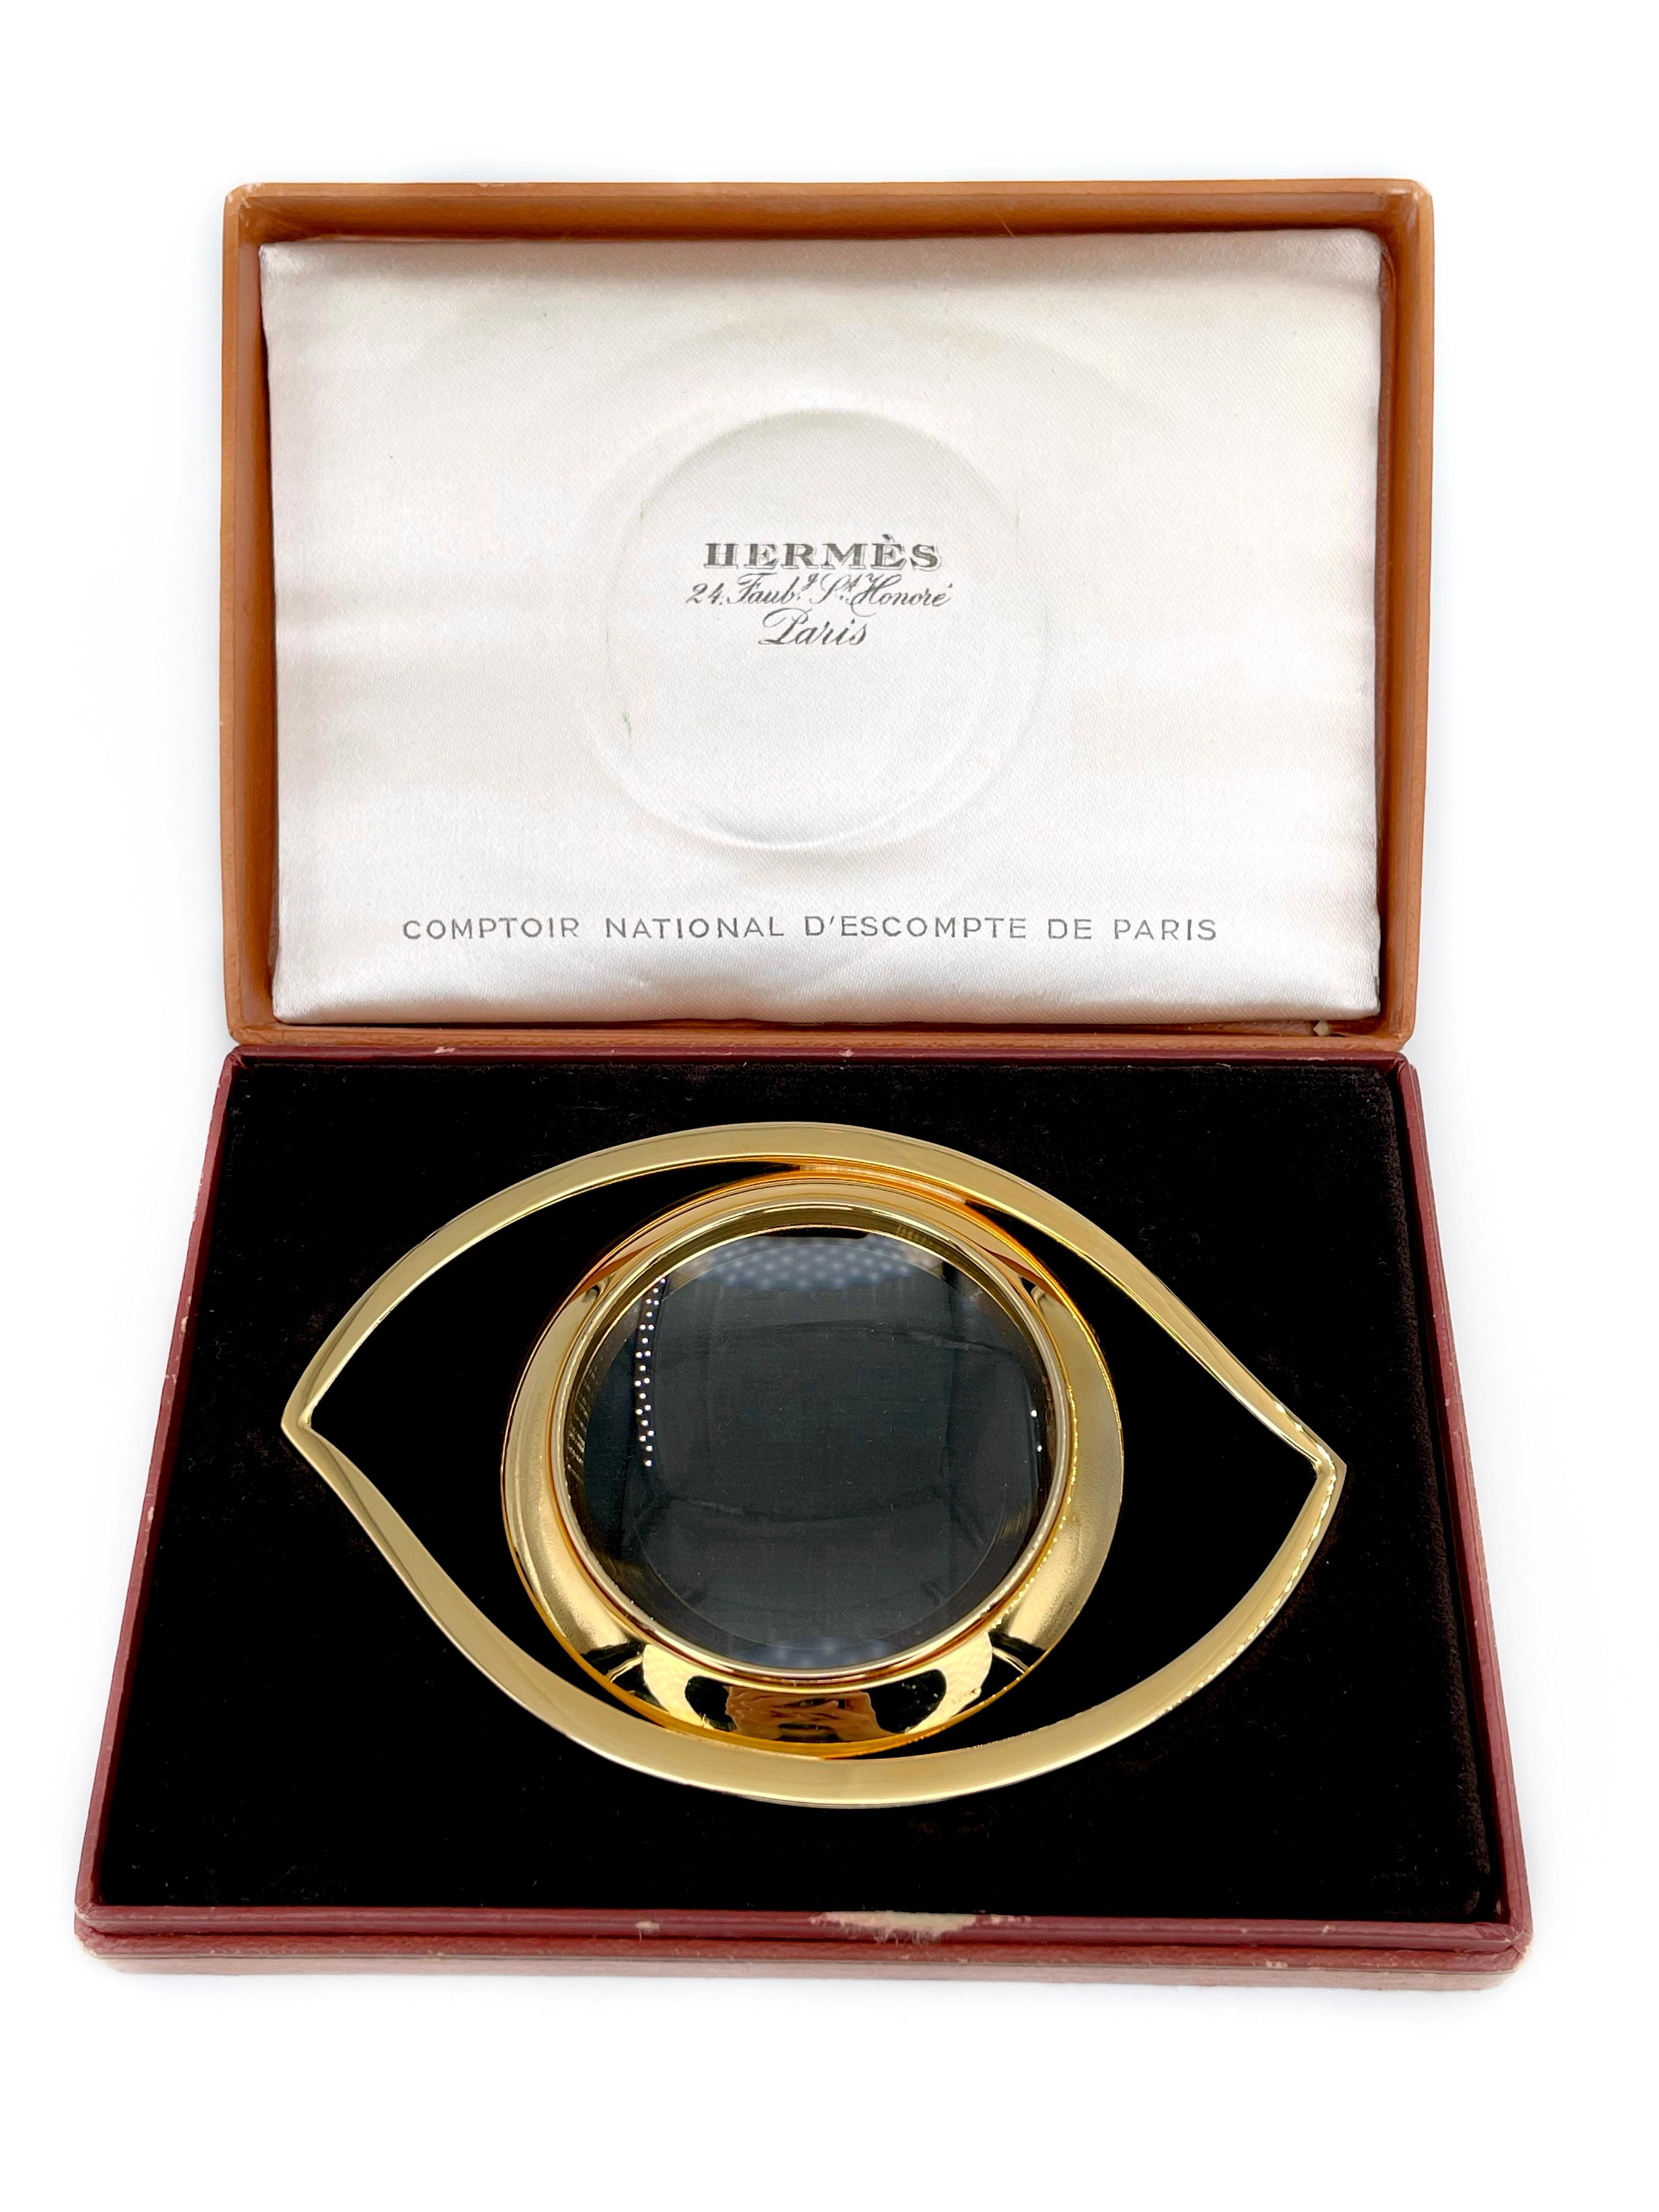 This is a desk magnifying glass designed by Jean Cocteau for Hermes in 1960’s. It represents the Eye of Cleopatra in a gilded metal. 

The piece can be used as an interior detail or also worn as a massive pendant or scarf ring. 

Signed: “Hermès.